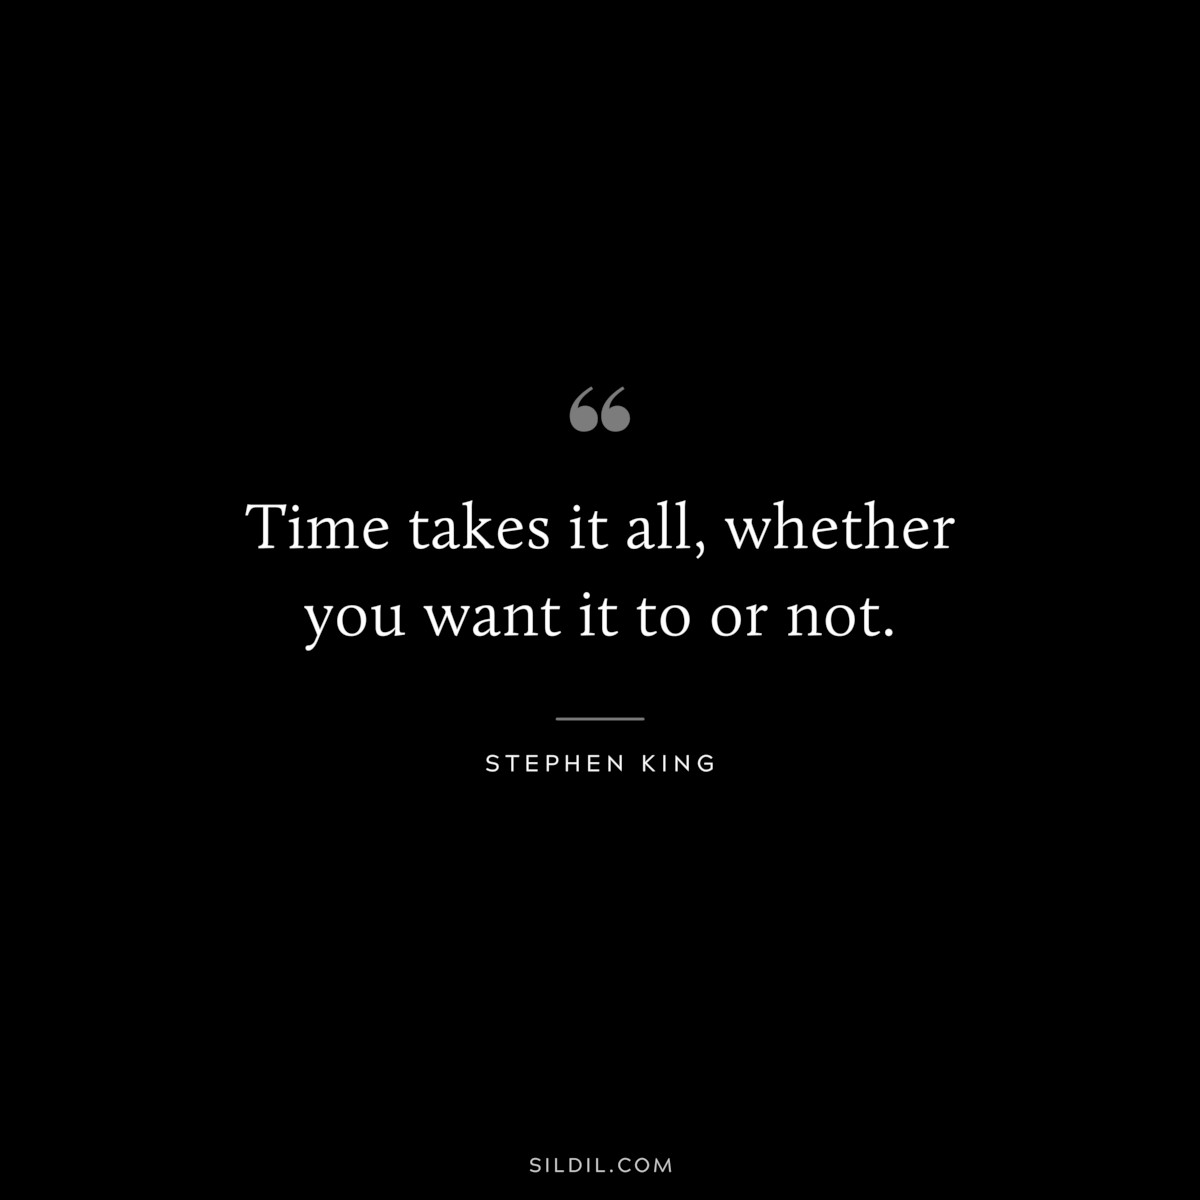 Time takes it all, whether you want it to or not. ― Stephen King